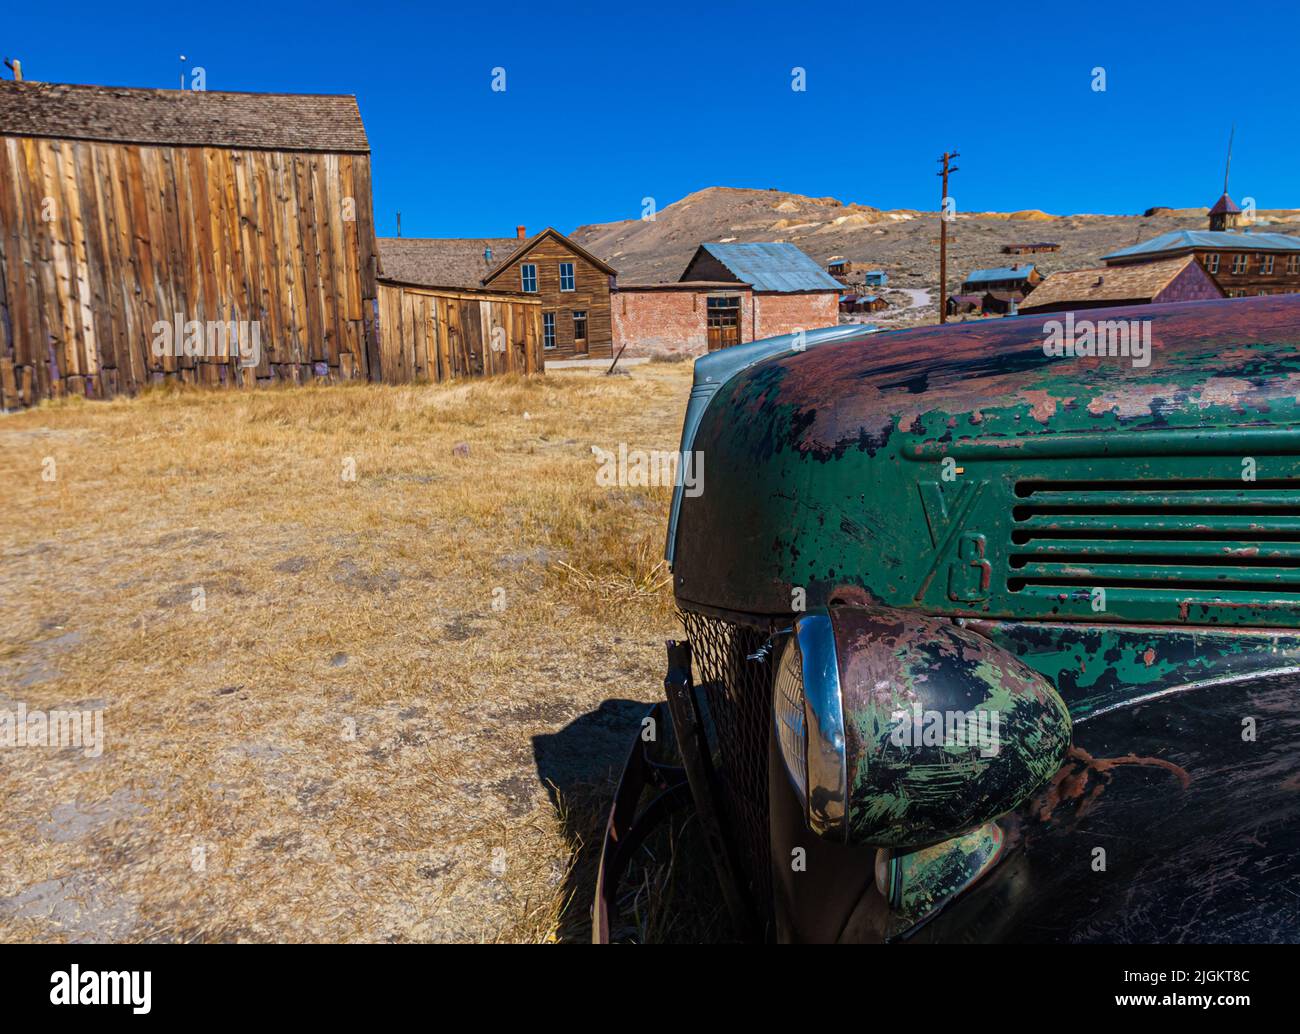 Abandoned Antique Truck, Bodie State Historical Park, California, USA Stock Photo